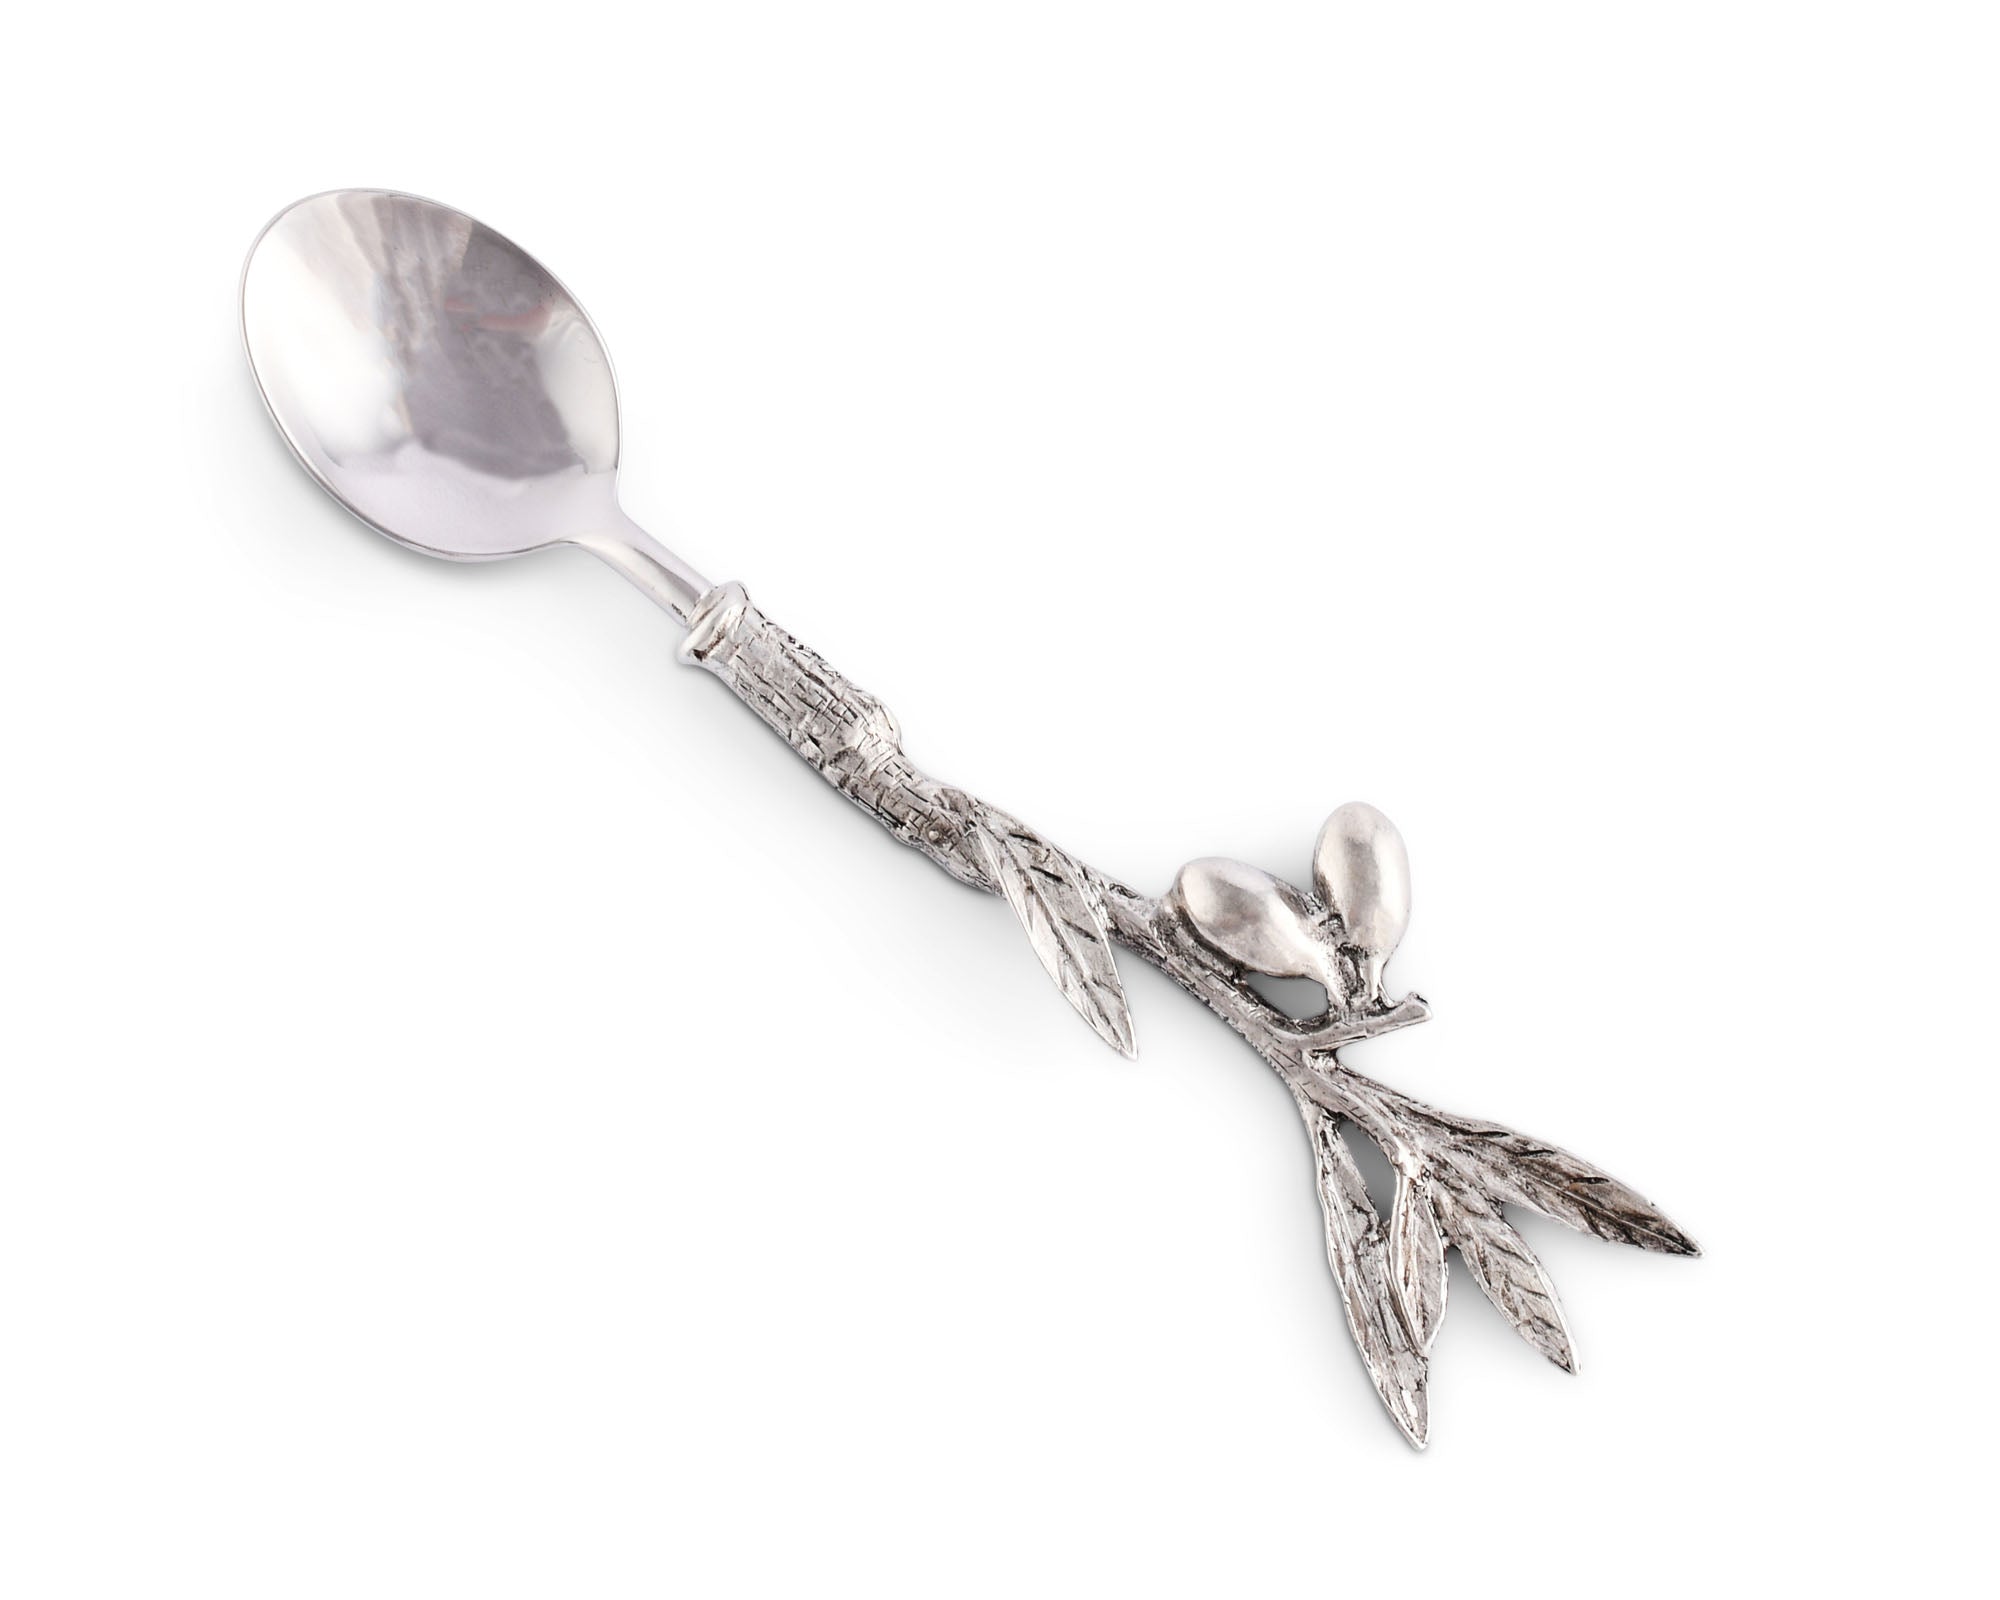 Vagabond House Olive Hors d oeuvre Spoon Product Image